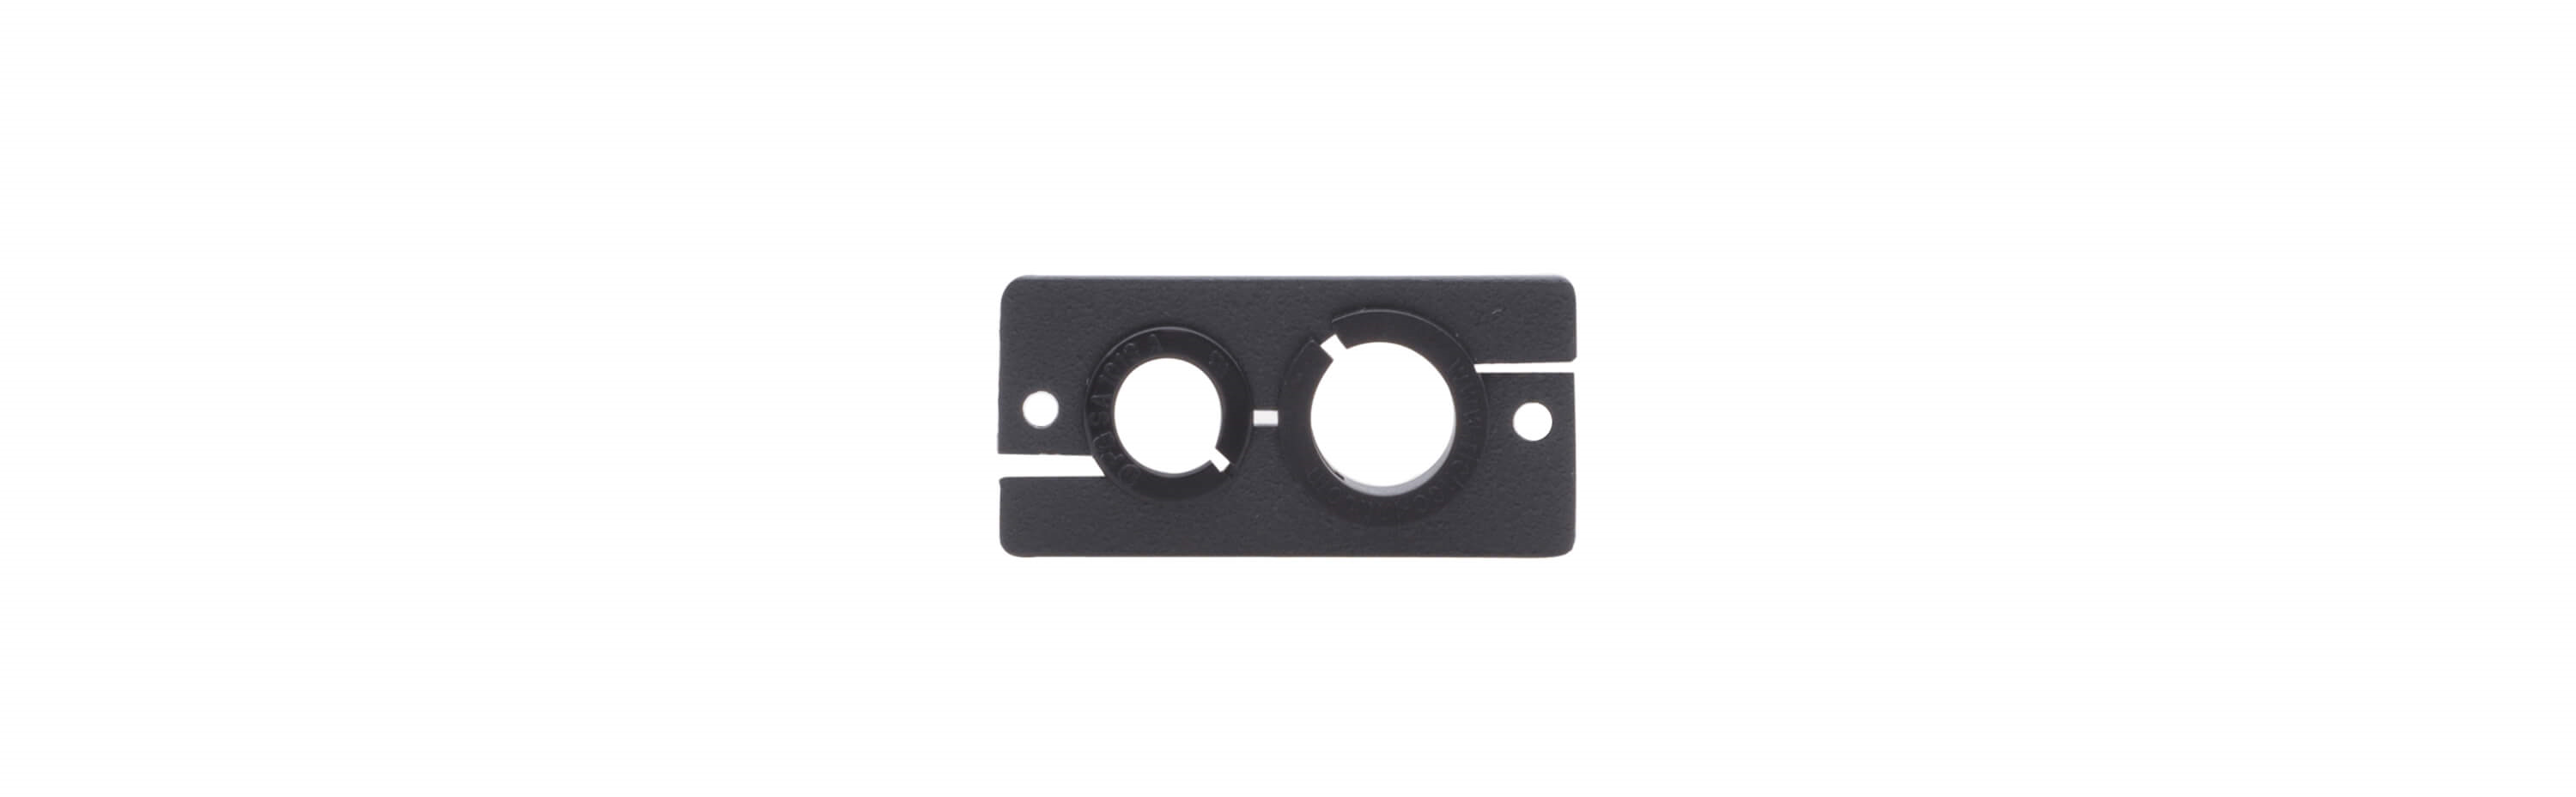 WCP-21 Wall Plate Insert — Two–Sized Cable Pass–Through